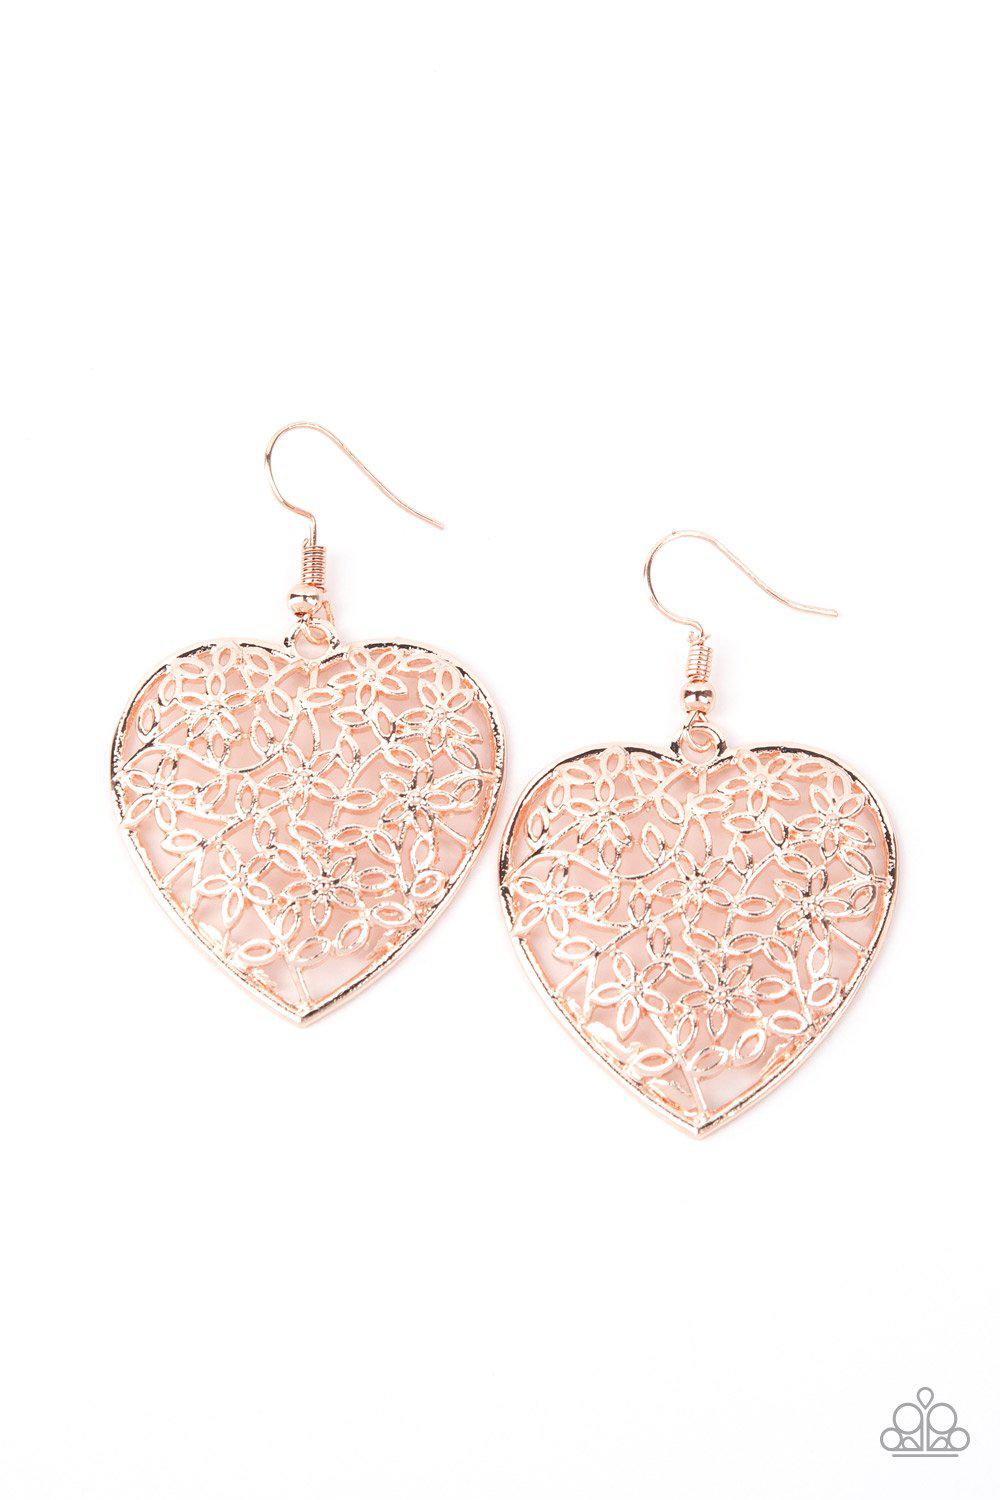 Let Your Heart Grow Rose Gold Heart Earrings - Paparazzi Accessories-CarasShop.com - $5 Jewelry by Cara Jewels